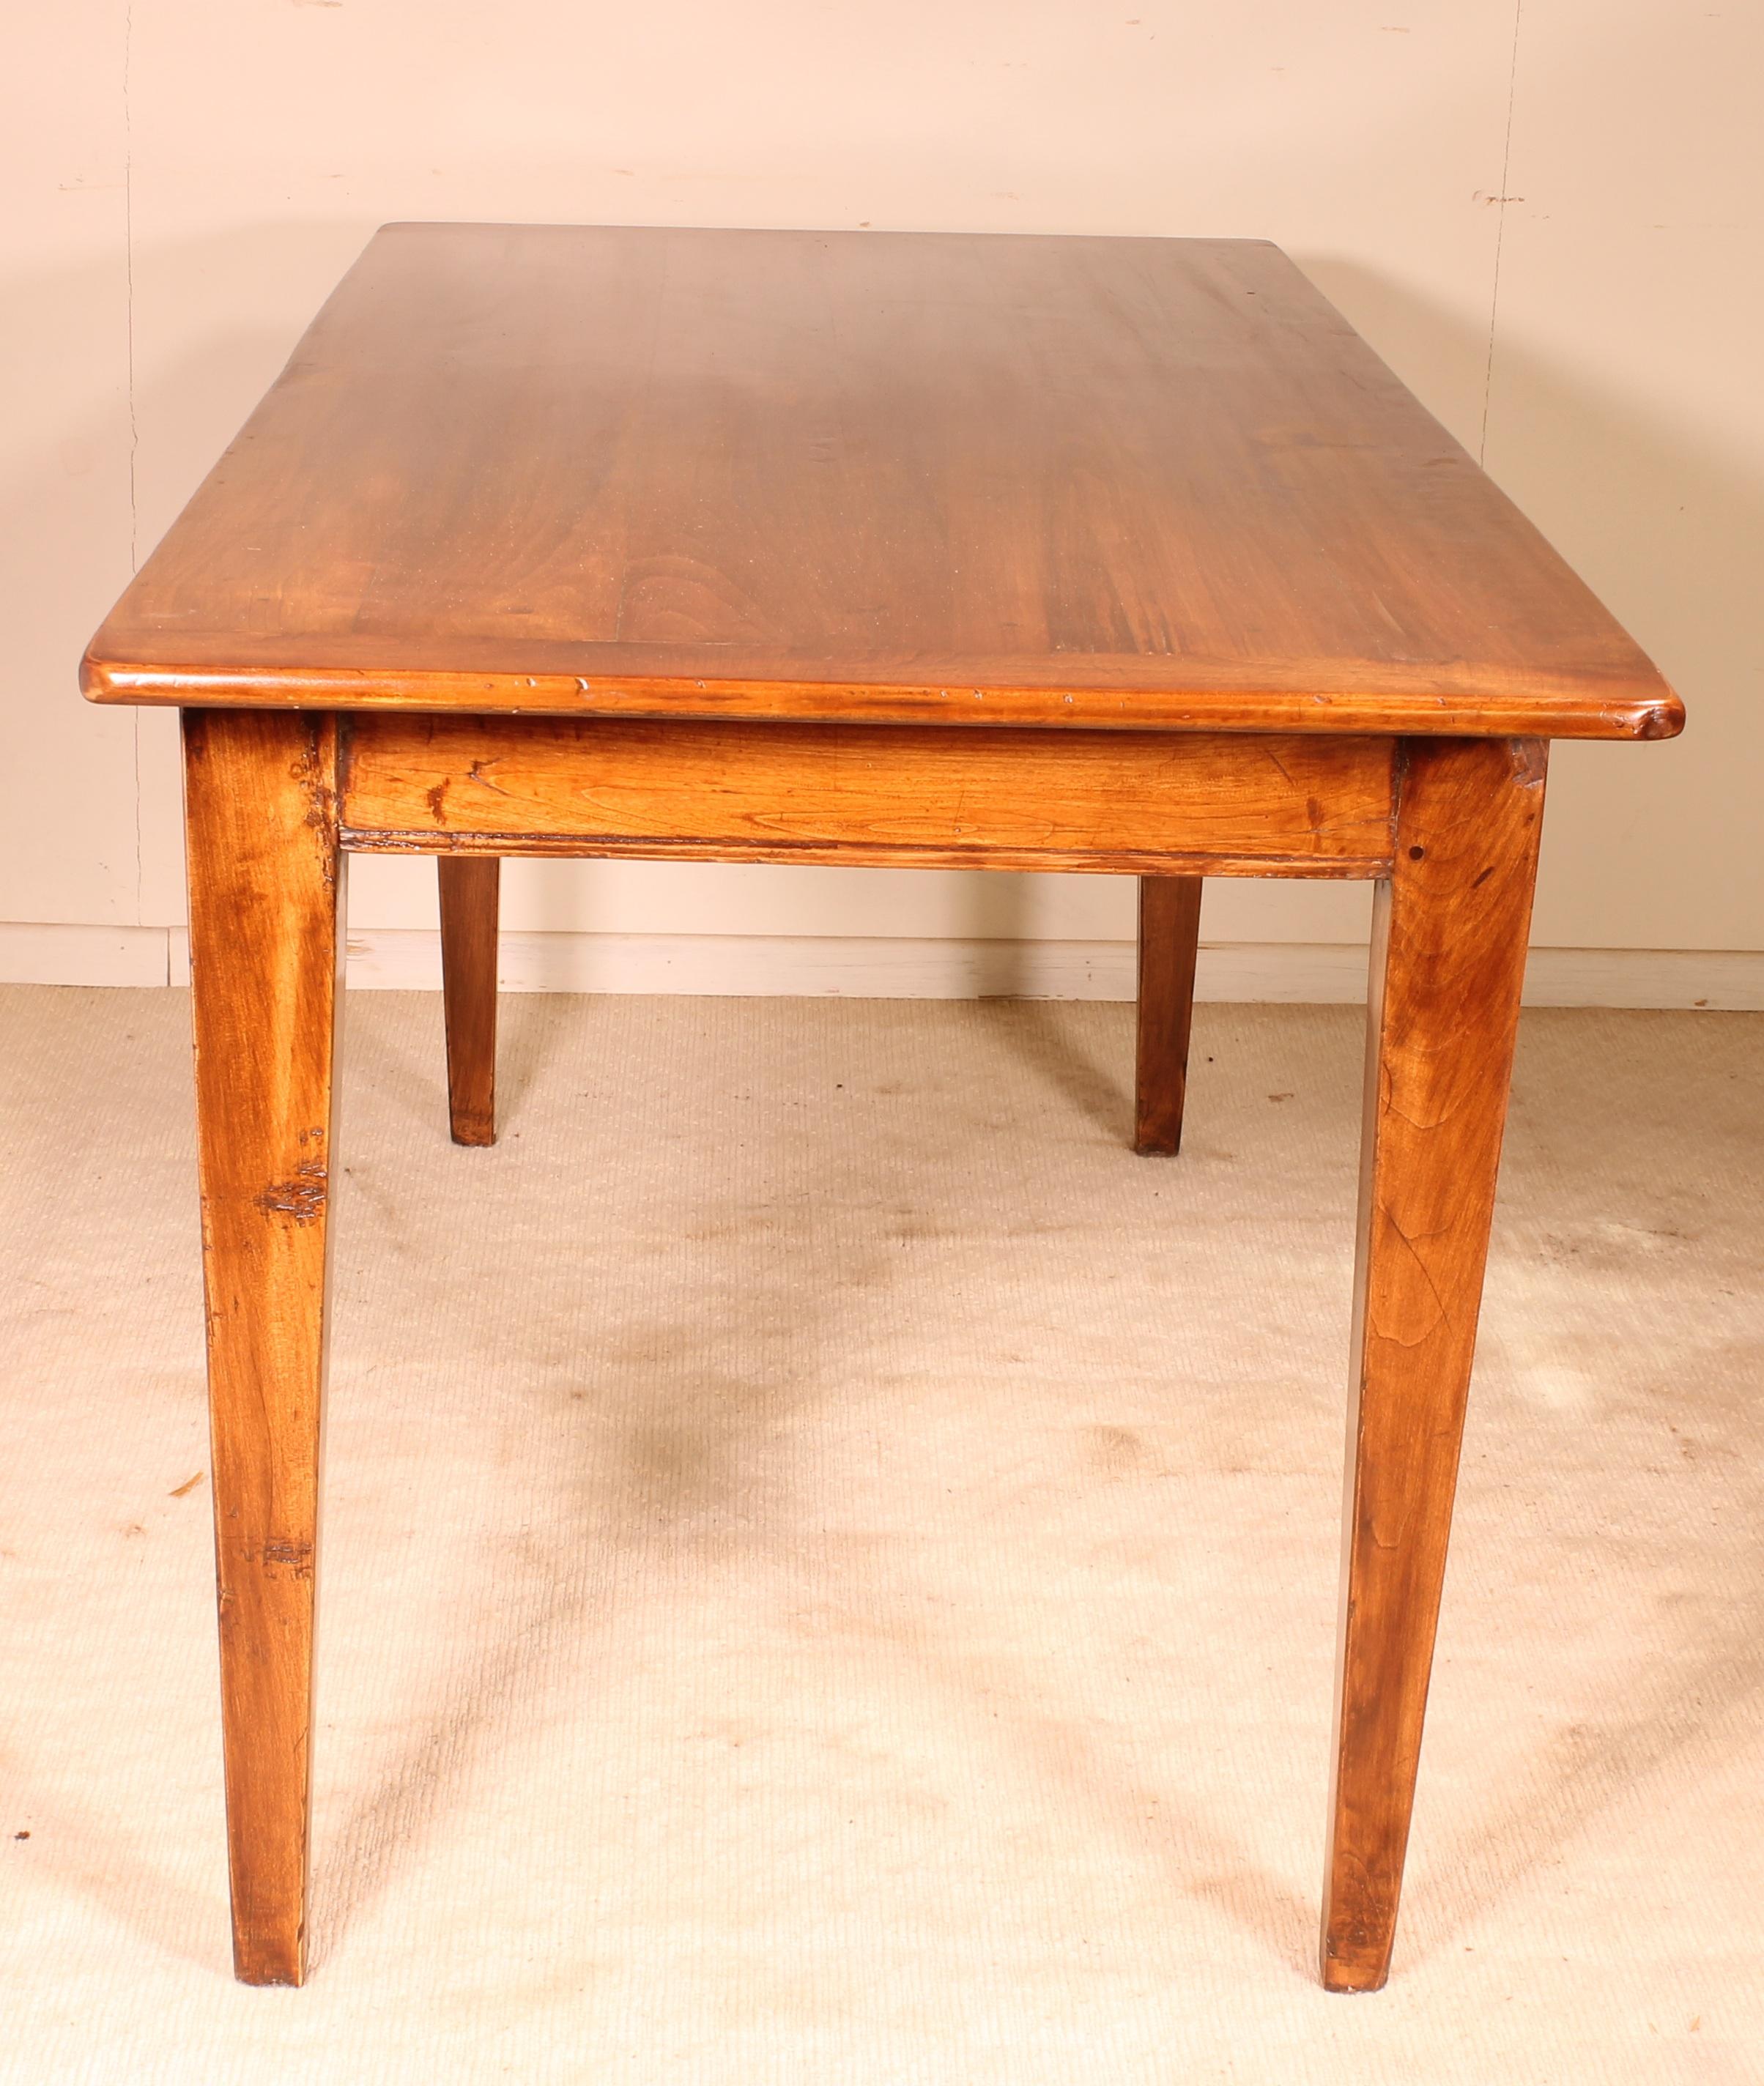 Louis Philippe Farm Table from the 19th Century from France in Wild Cherrywood